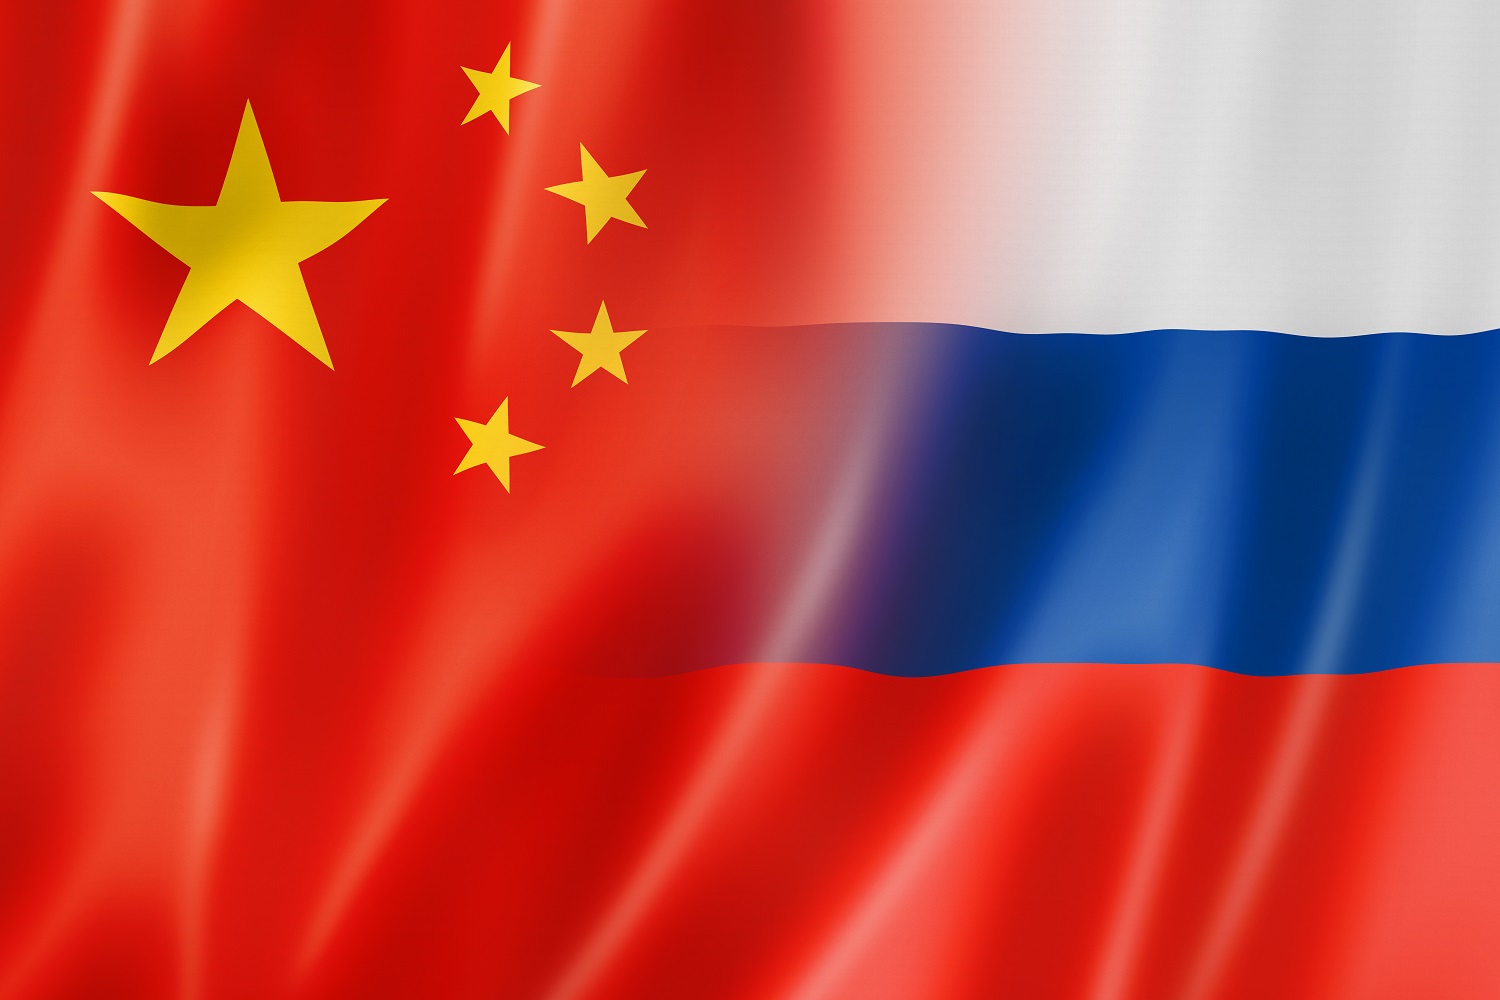 The flags of China and Russia are mixed with each other.